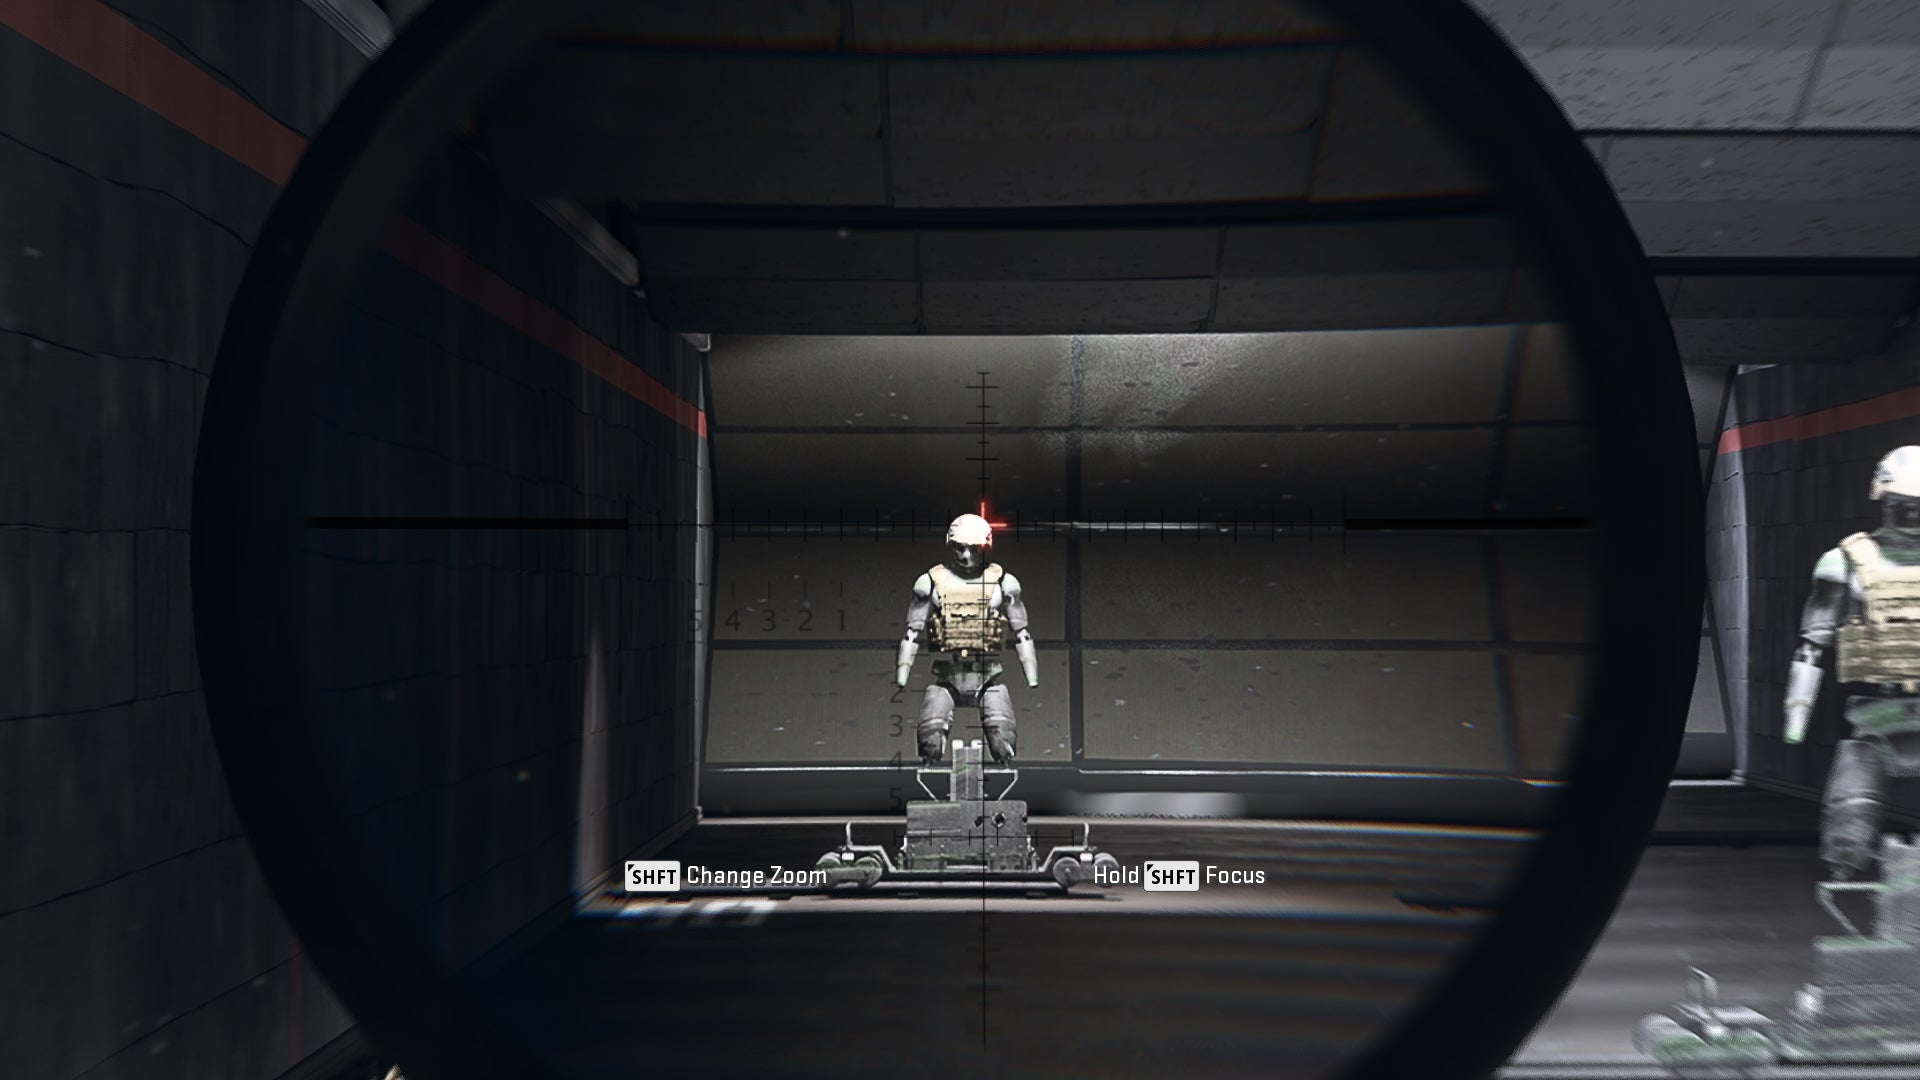 The player in Warzone 2.0 aims at a training dummy using the Signal 50 8x optic attachment.